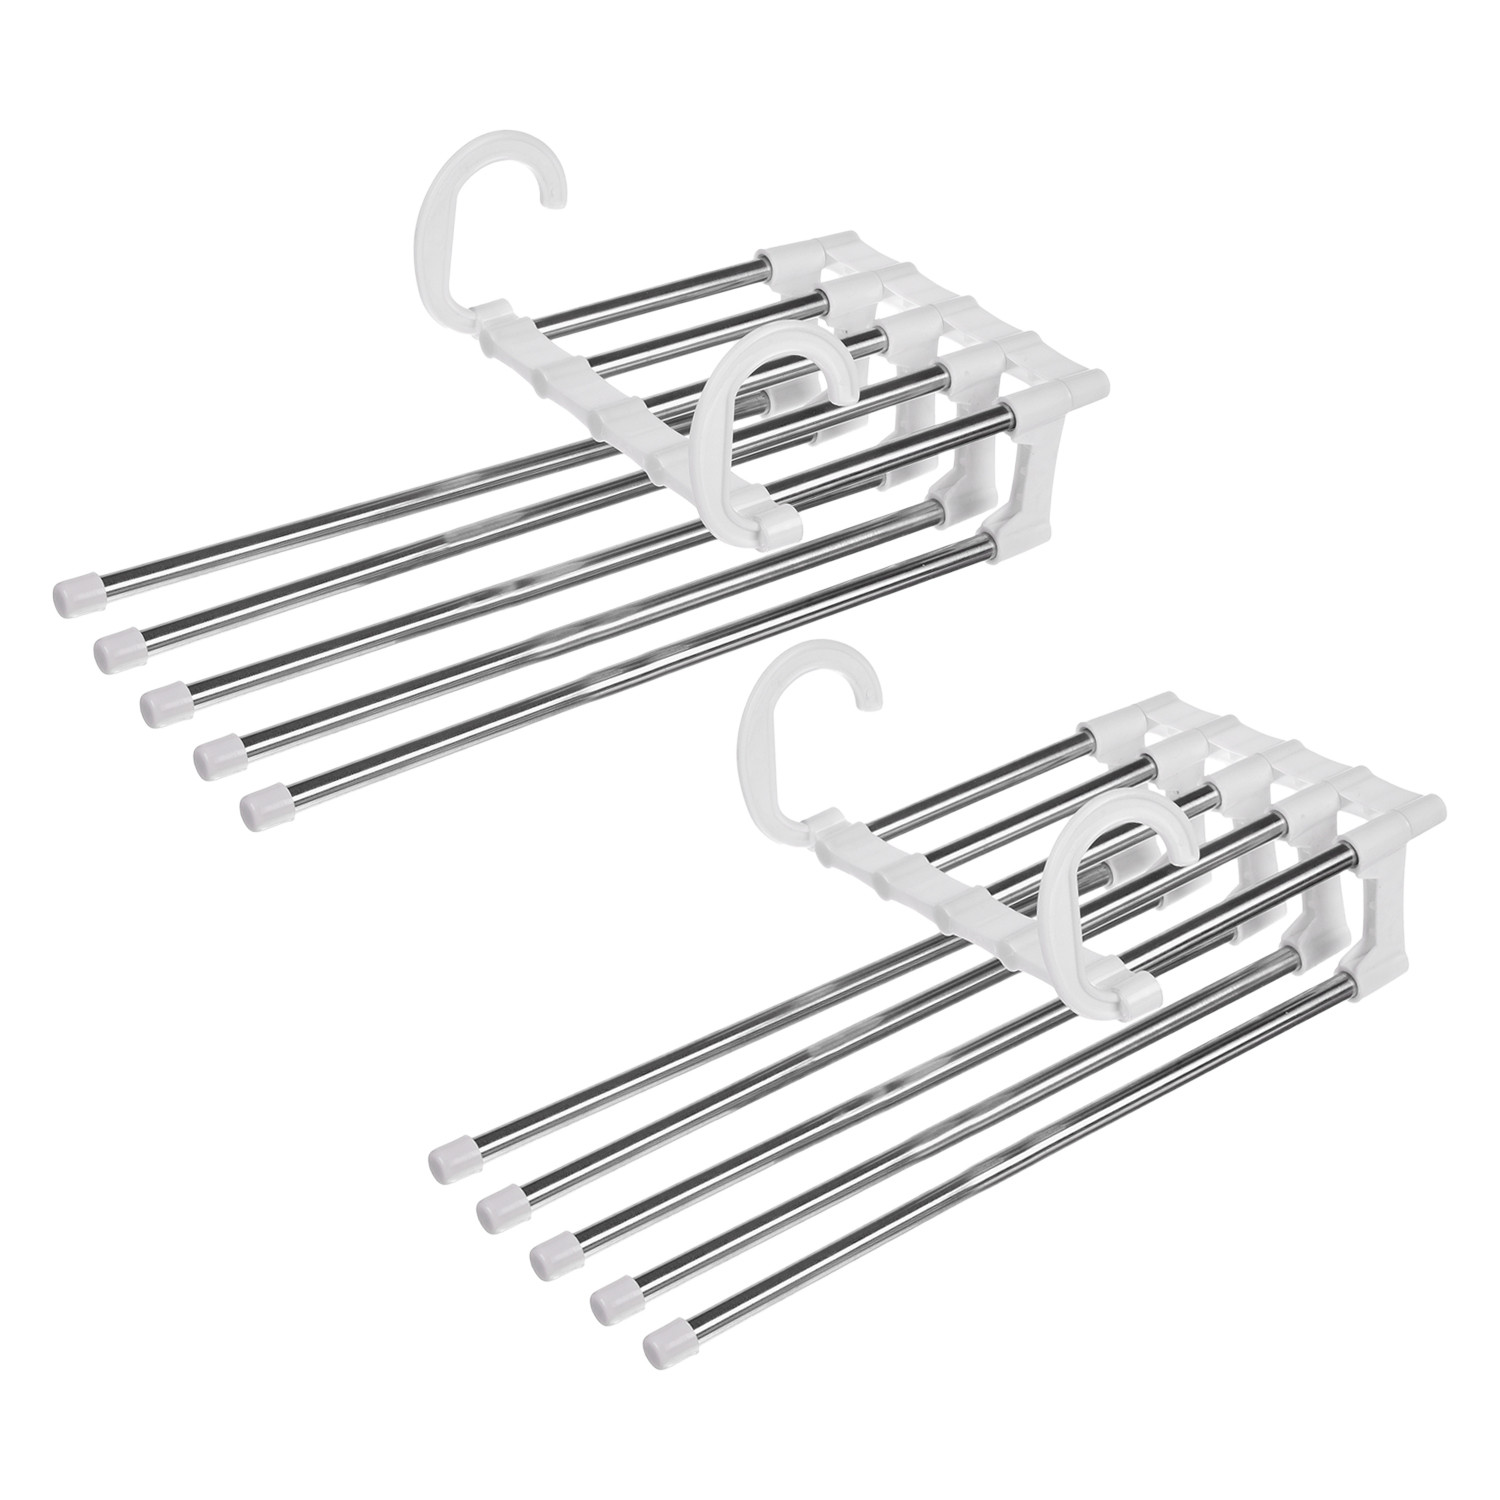 Kuber Industries Magic Pants Hanger|Stainless Steel 4 Layers Trousers Hanger|Closet Storage Organizer For Jeans|Scarves|Belts|Towels (White)